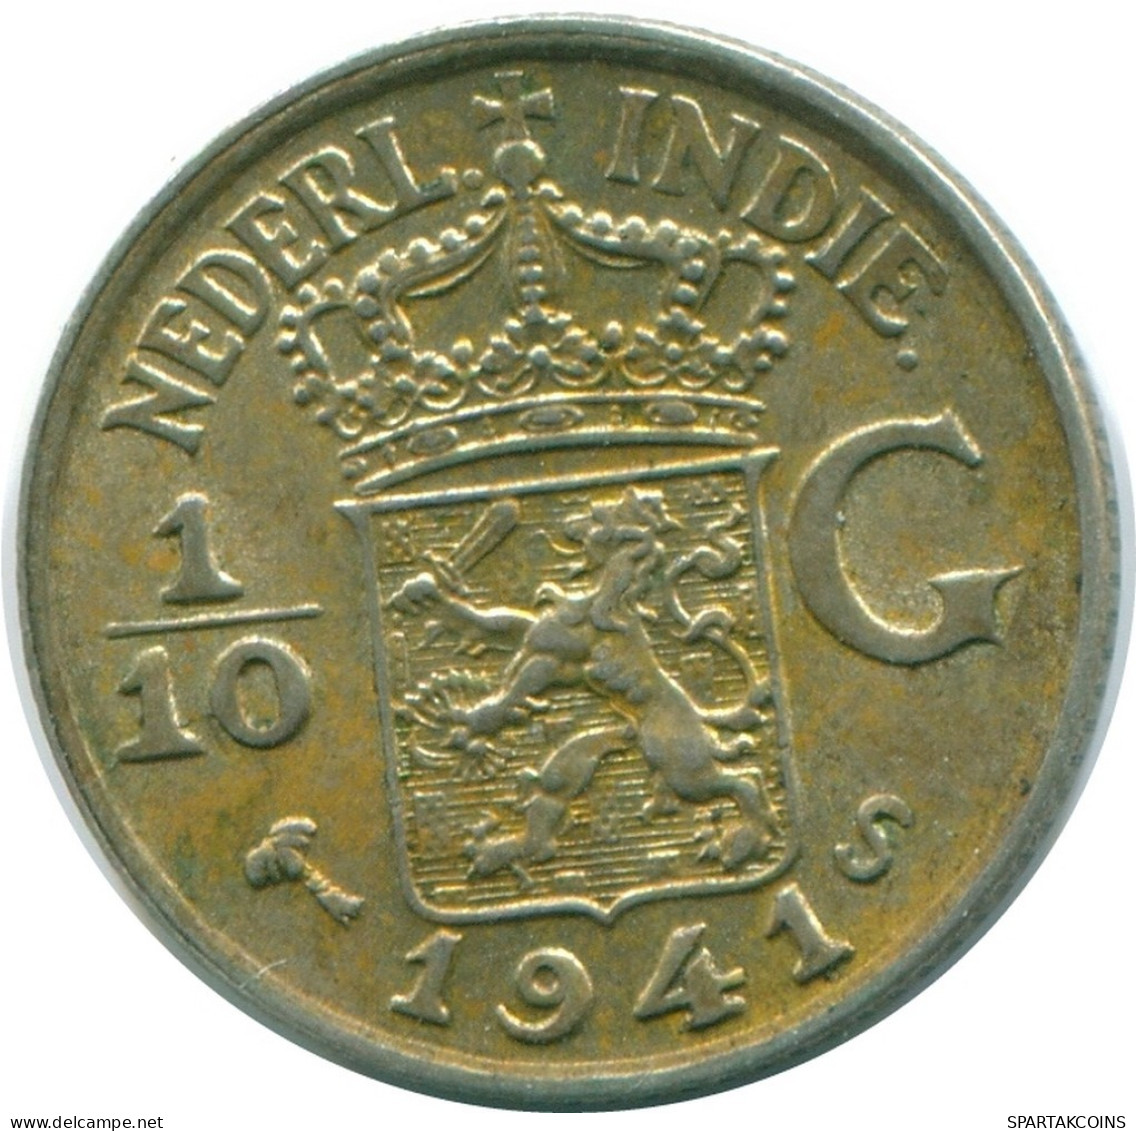 1/10 GULDEN 1941 P NETHERLANDS EAST INDIES SILVER Colonial Coin #NL13744.3.U.A - Dutch East Indies